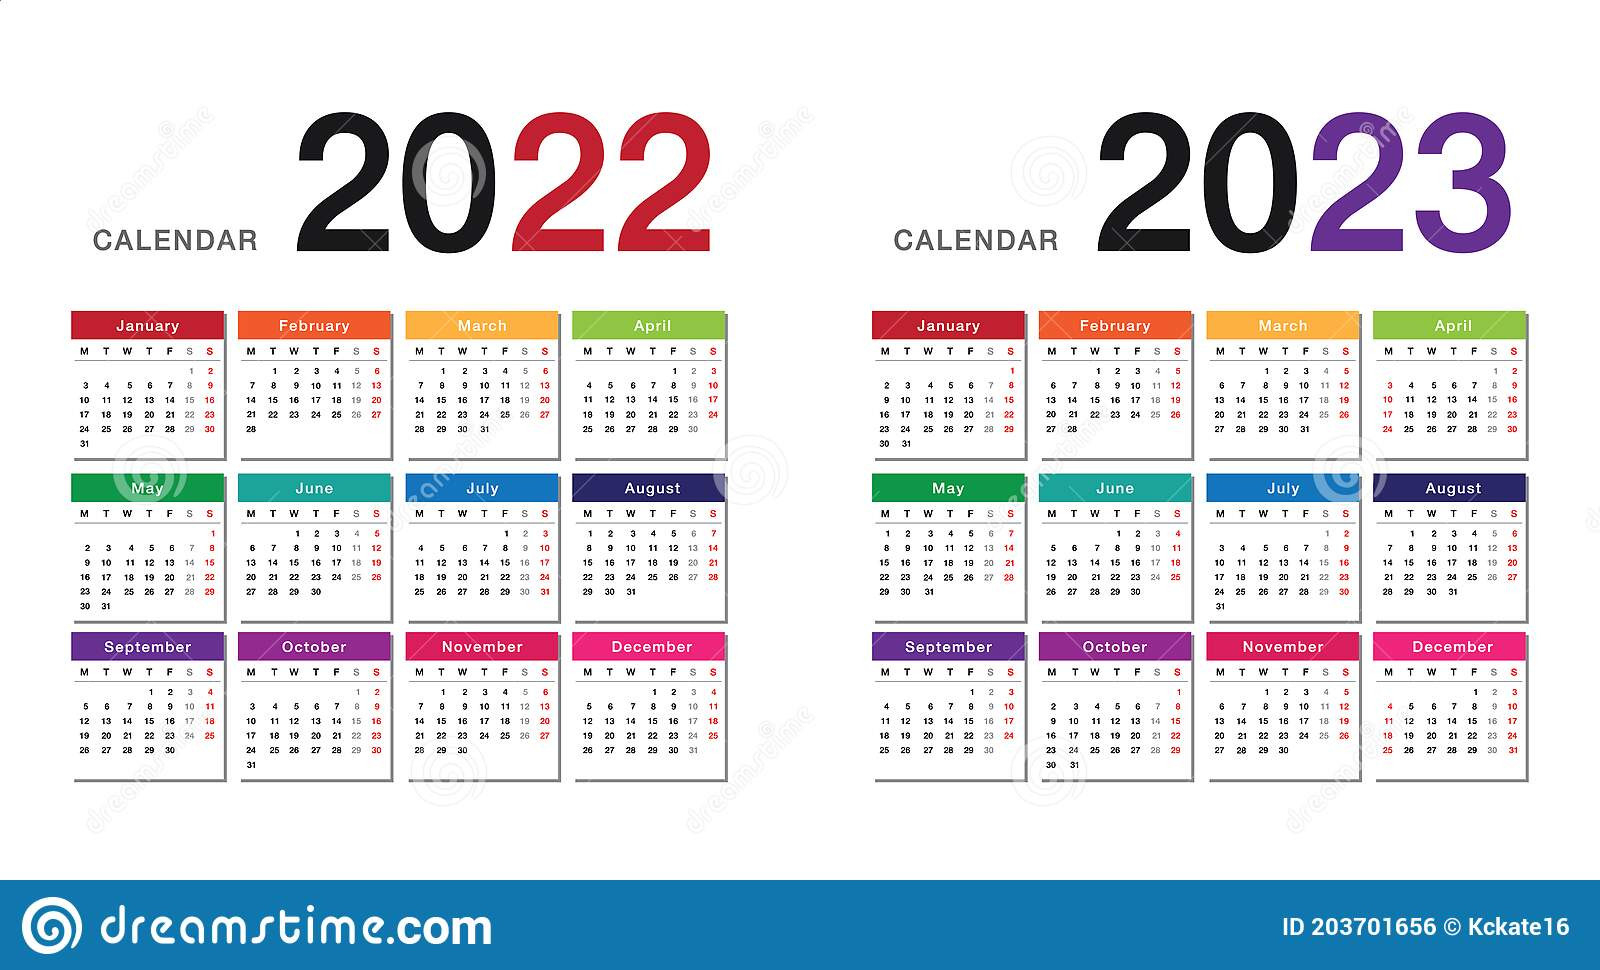 Colorful Year 2022 And Year 2023 Calendar Horizontal Vector Design-Calendar Year 2022 And 2023